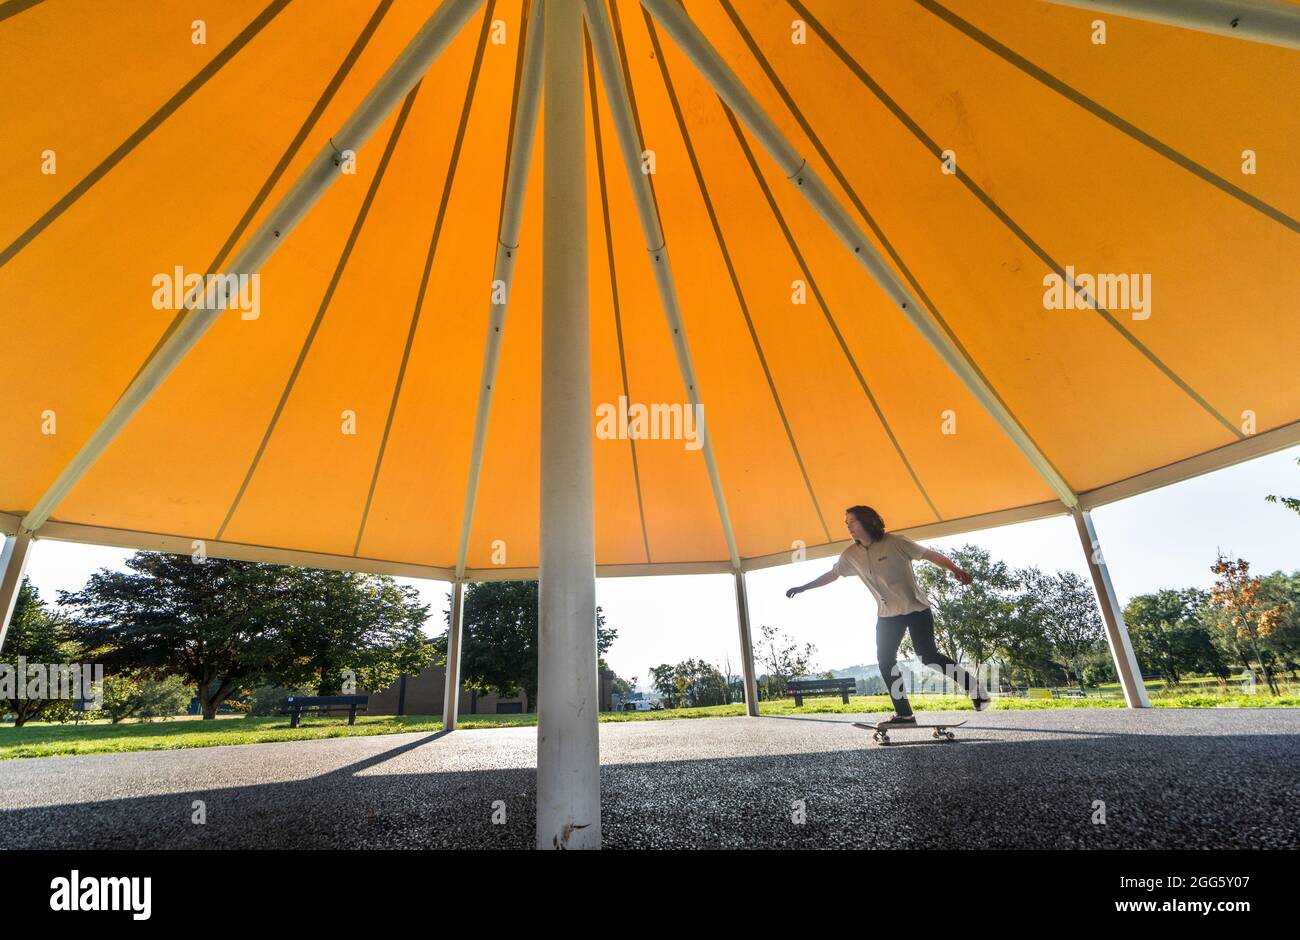 Carrigaline, Cork, Irland. August 2021. Joshua O Drisceoil skates under the Canopy of the New Bandstand at the Community Park in Carrigaline, Co. Cork, Ireland. - Credit: David Creedon / Alamy Live News Stockfoto